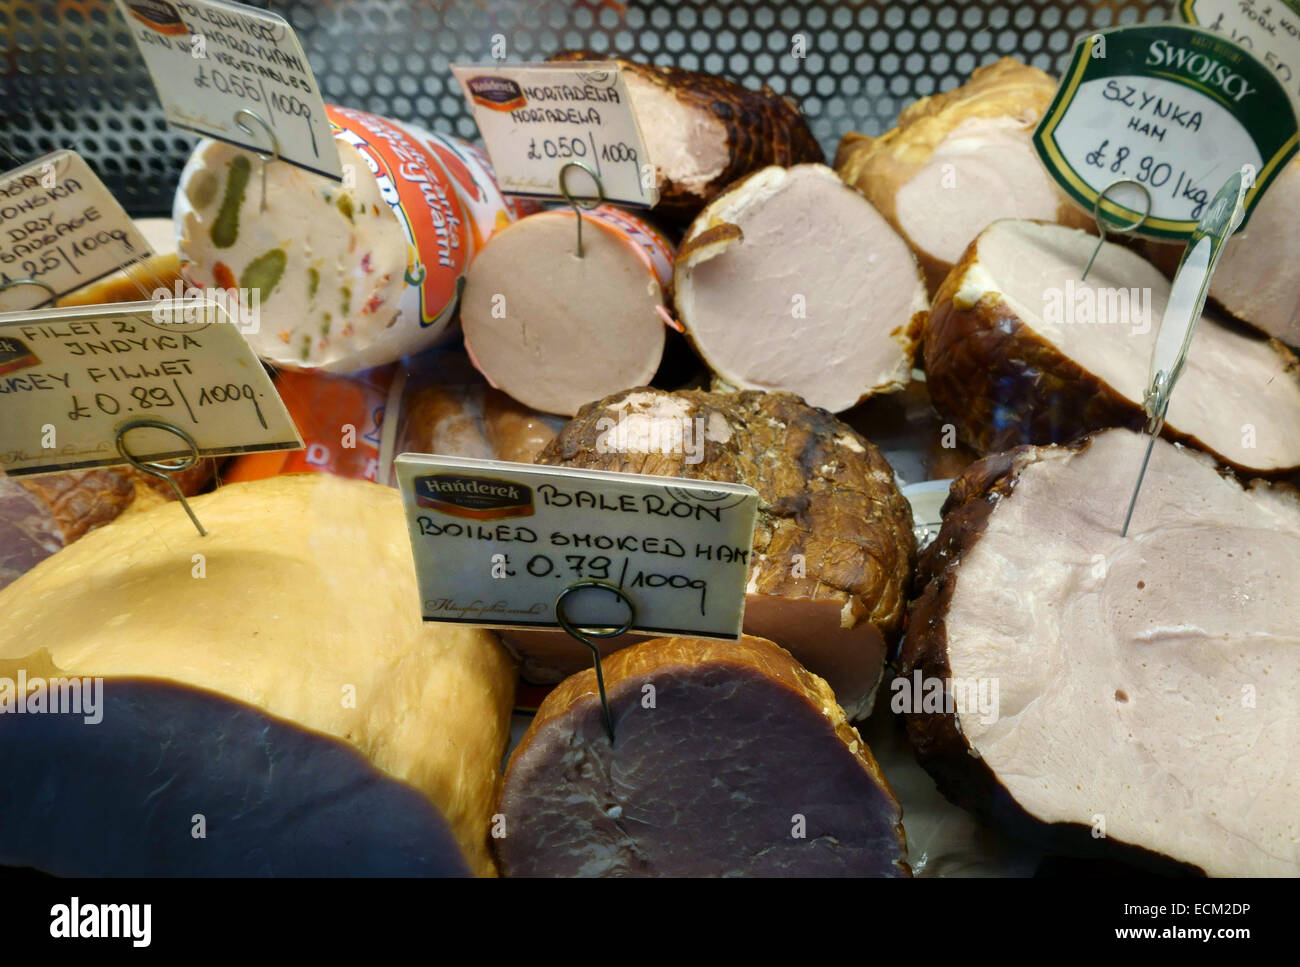 Cooked meat from Poland displayed in Polsmak Polish delicatessen in Dalston, London Stock Photo